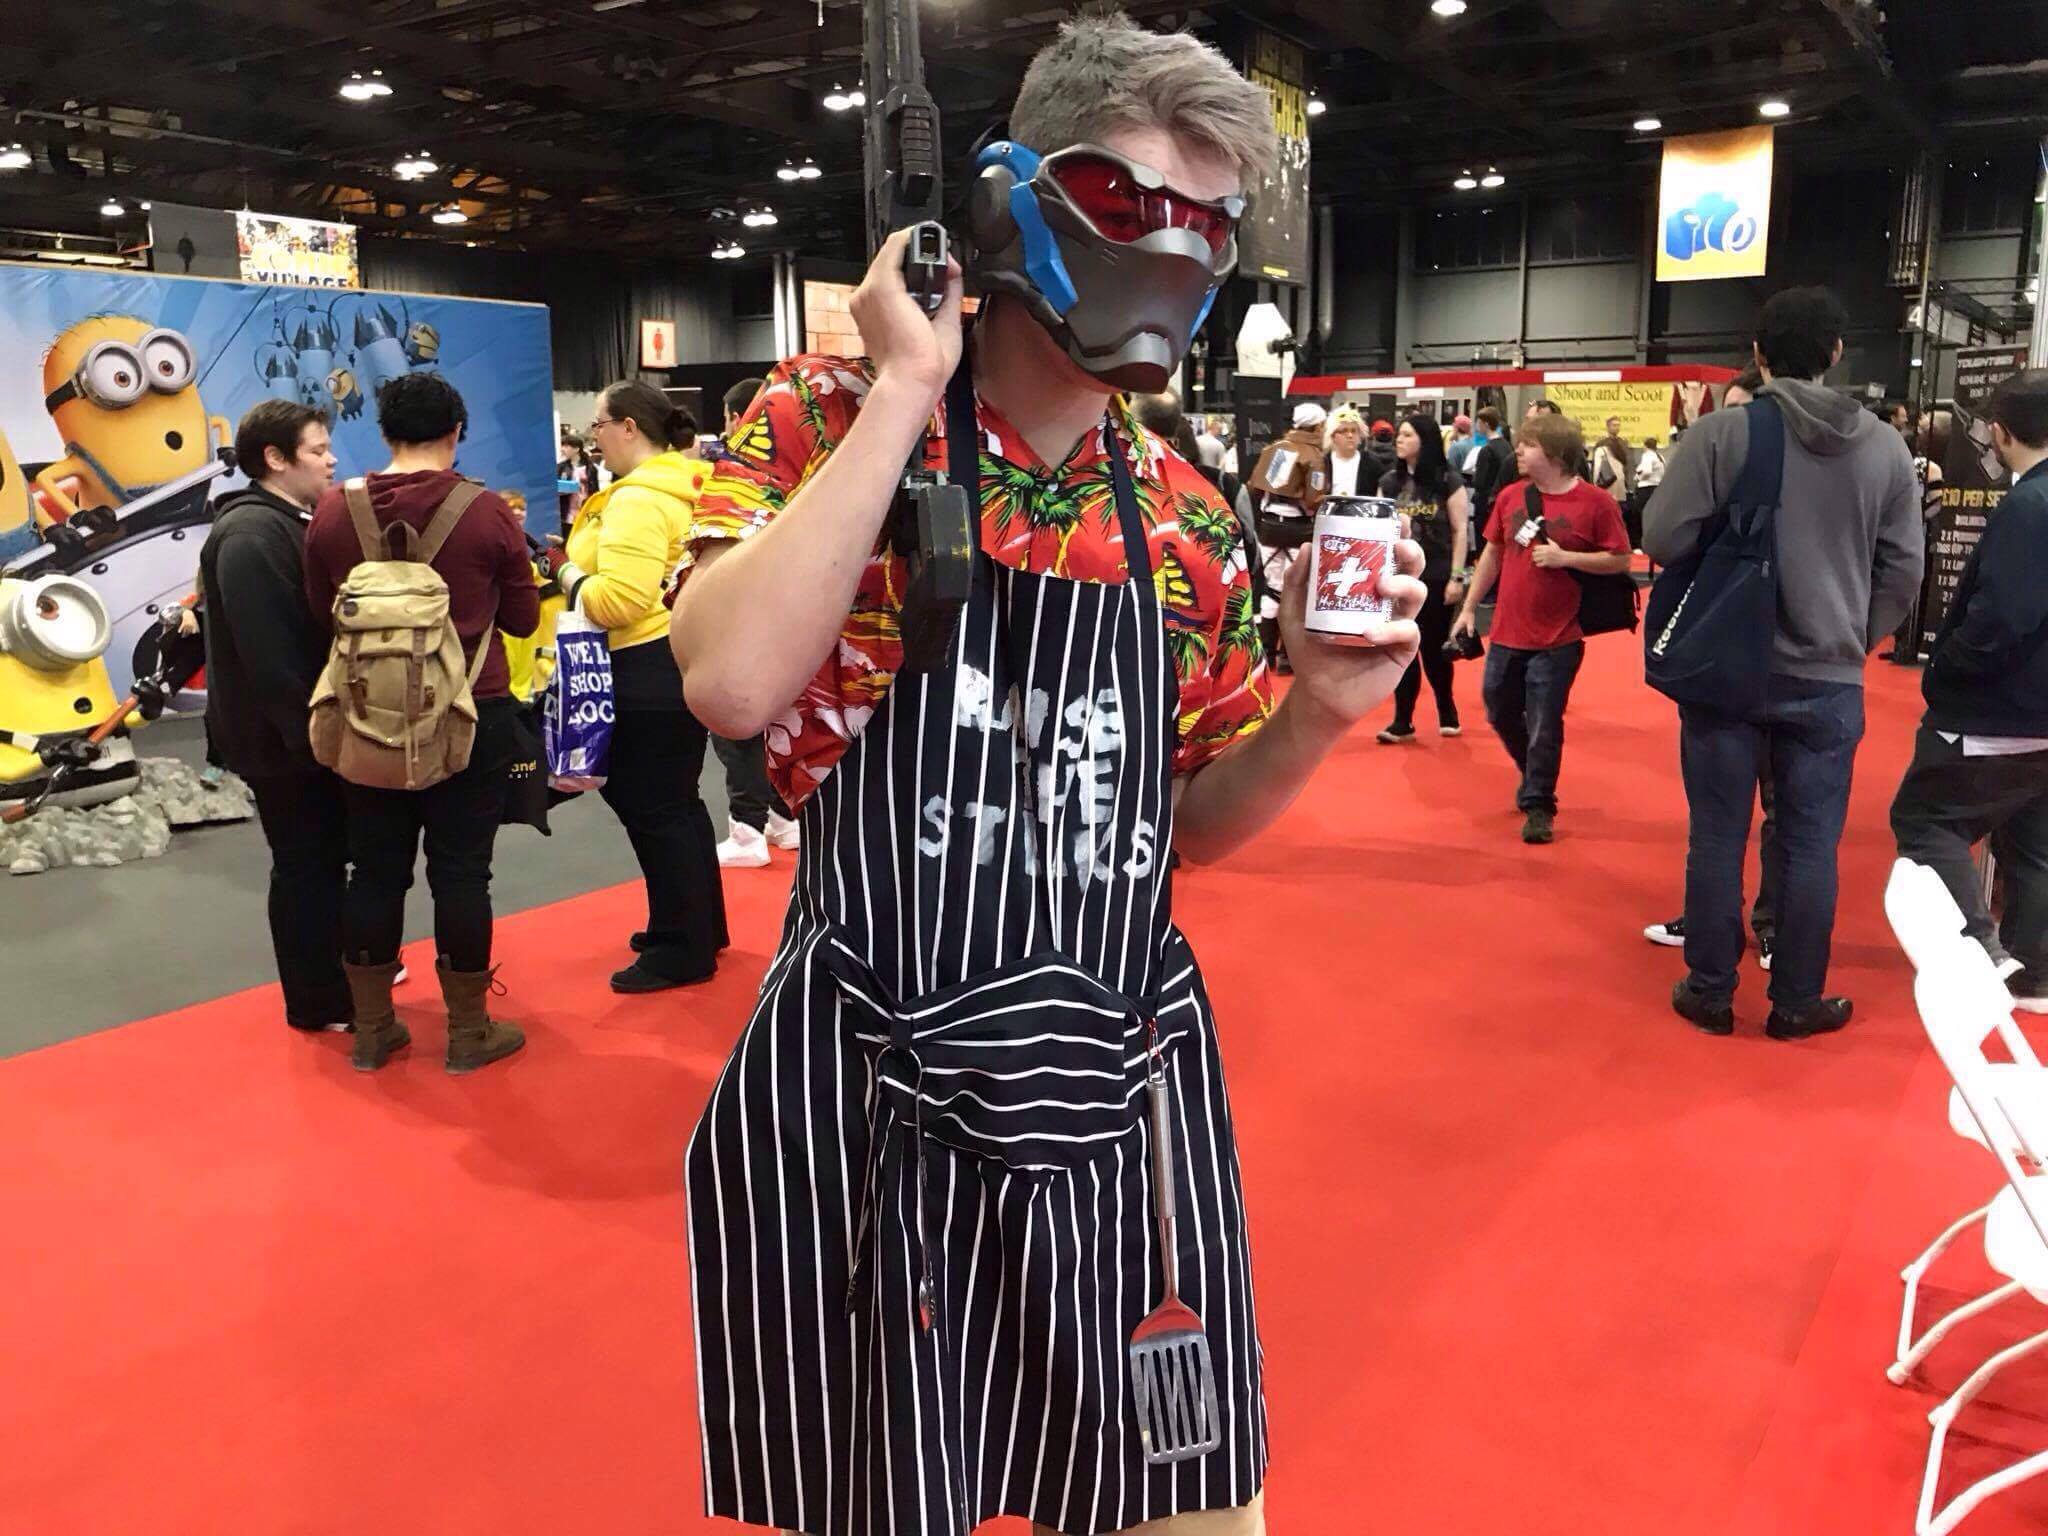 Self Grillmaster At Mcm Glasgow This Weekend And Day